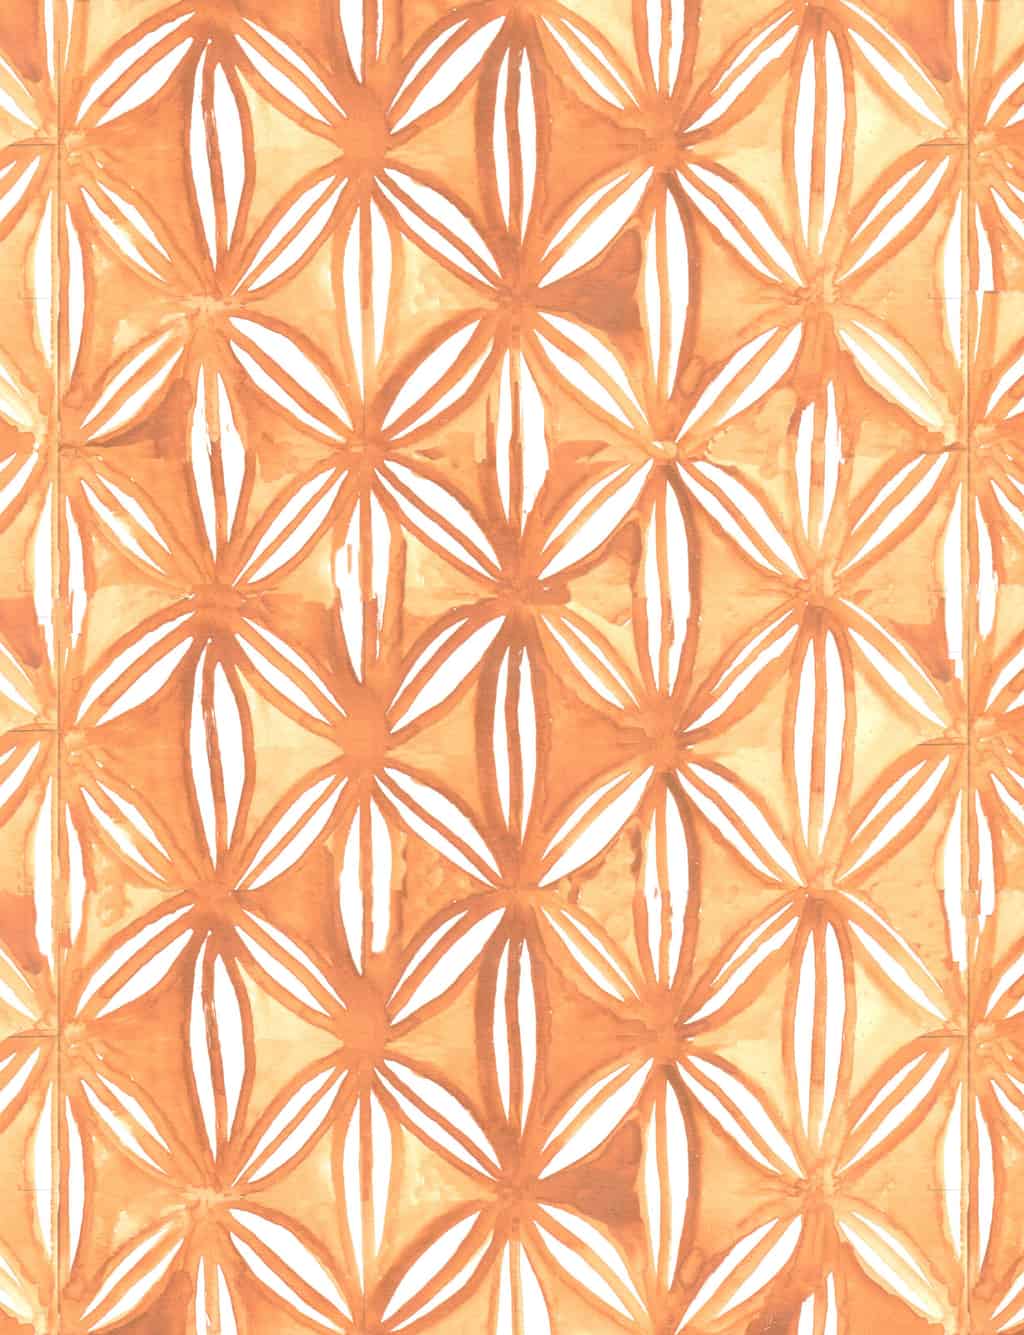 Repeating patterns with watercolour 